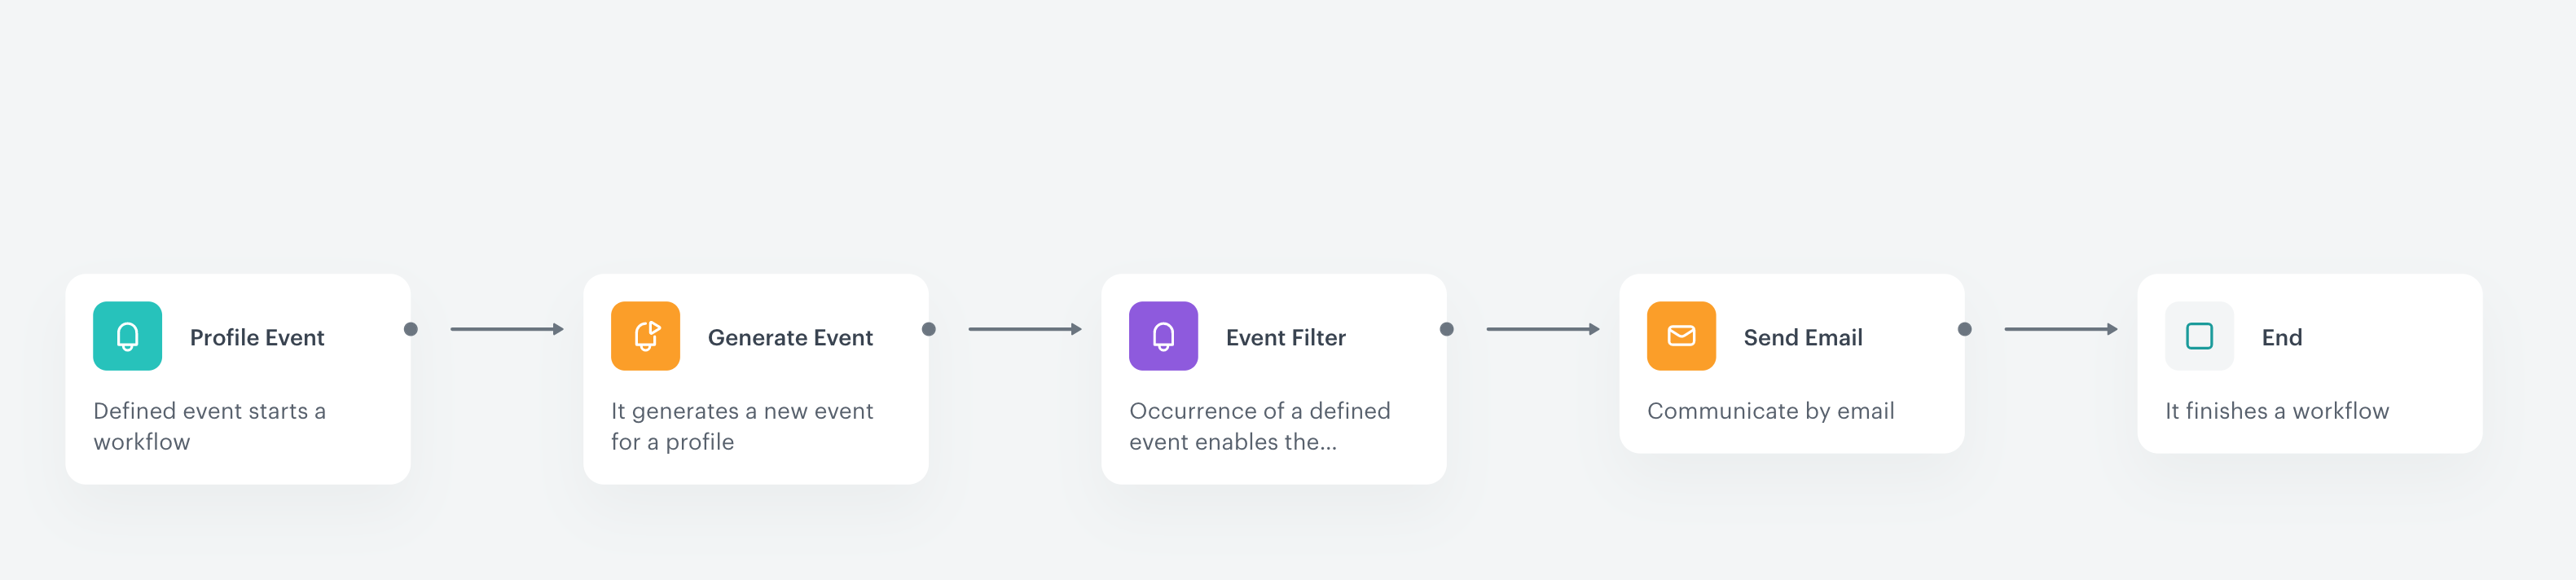 The workflow configuration